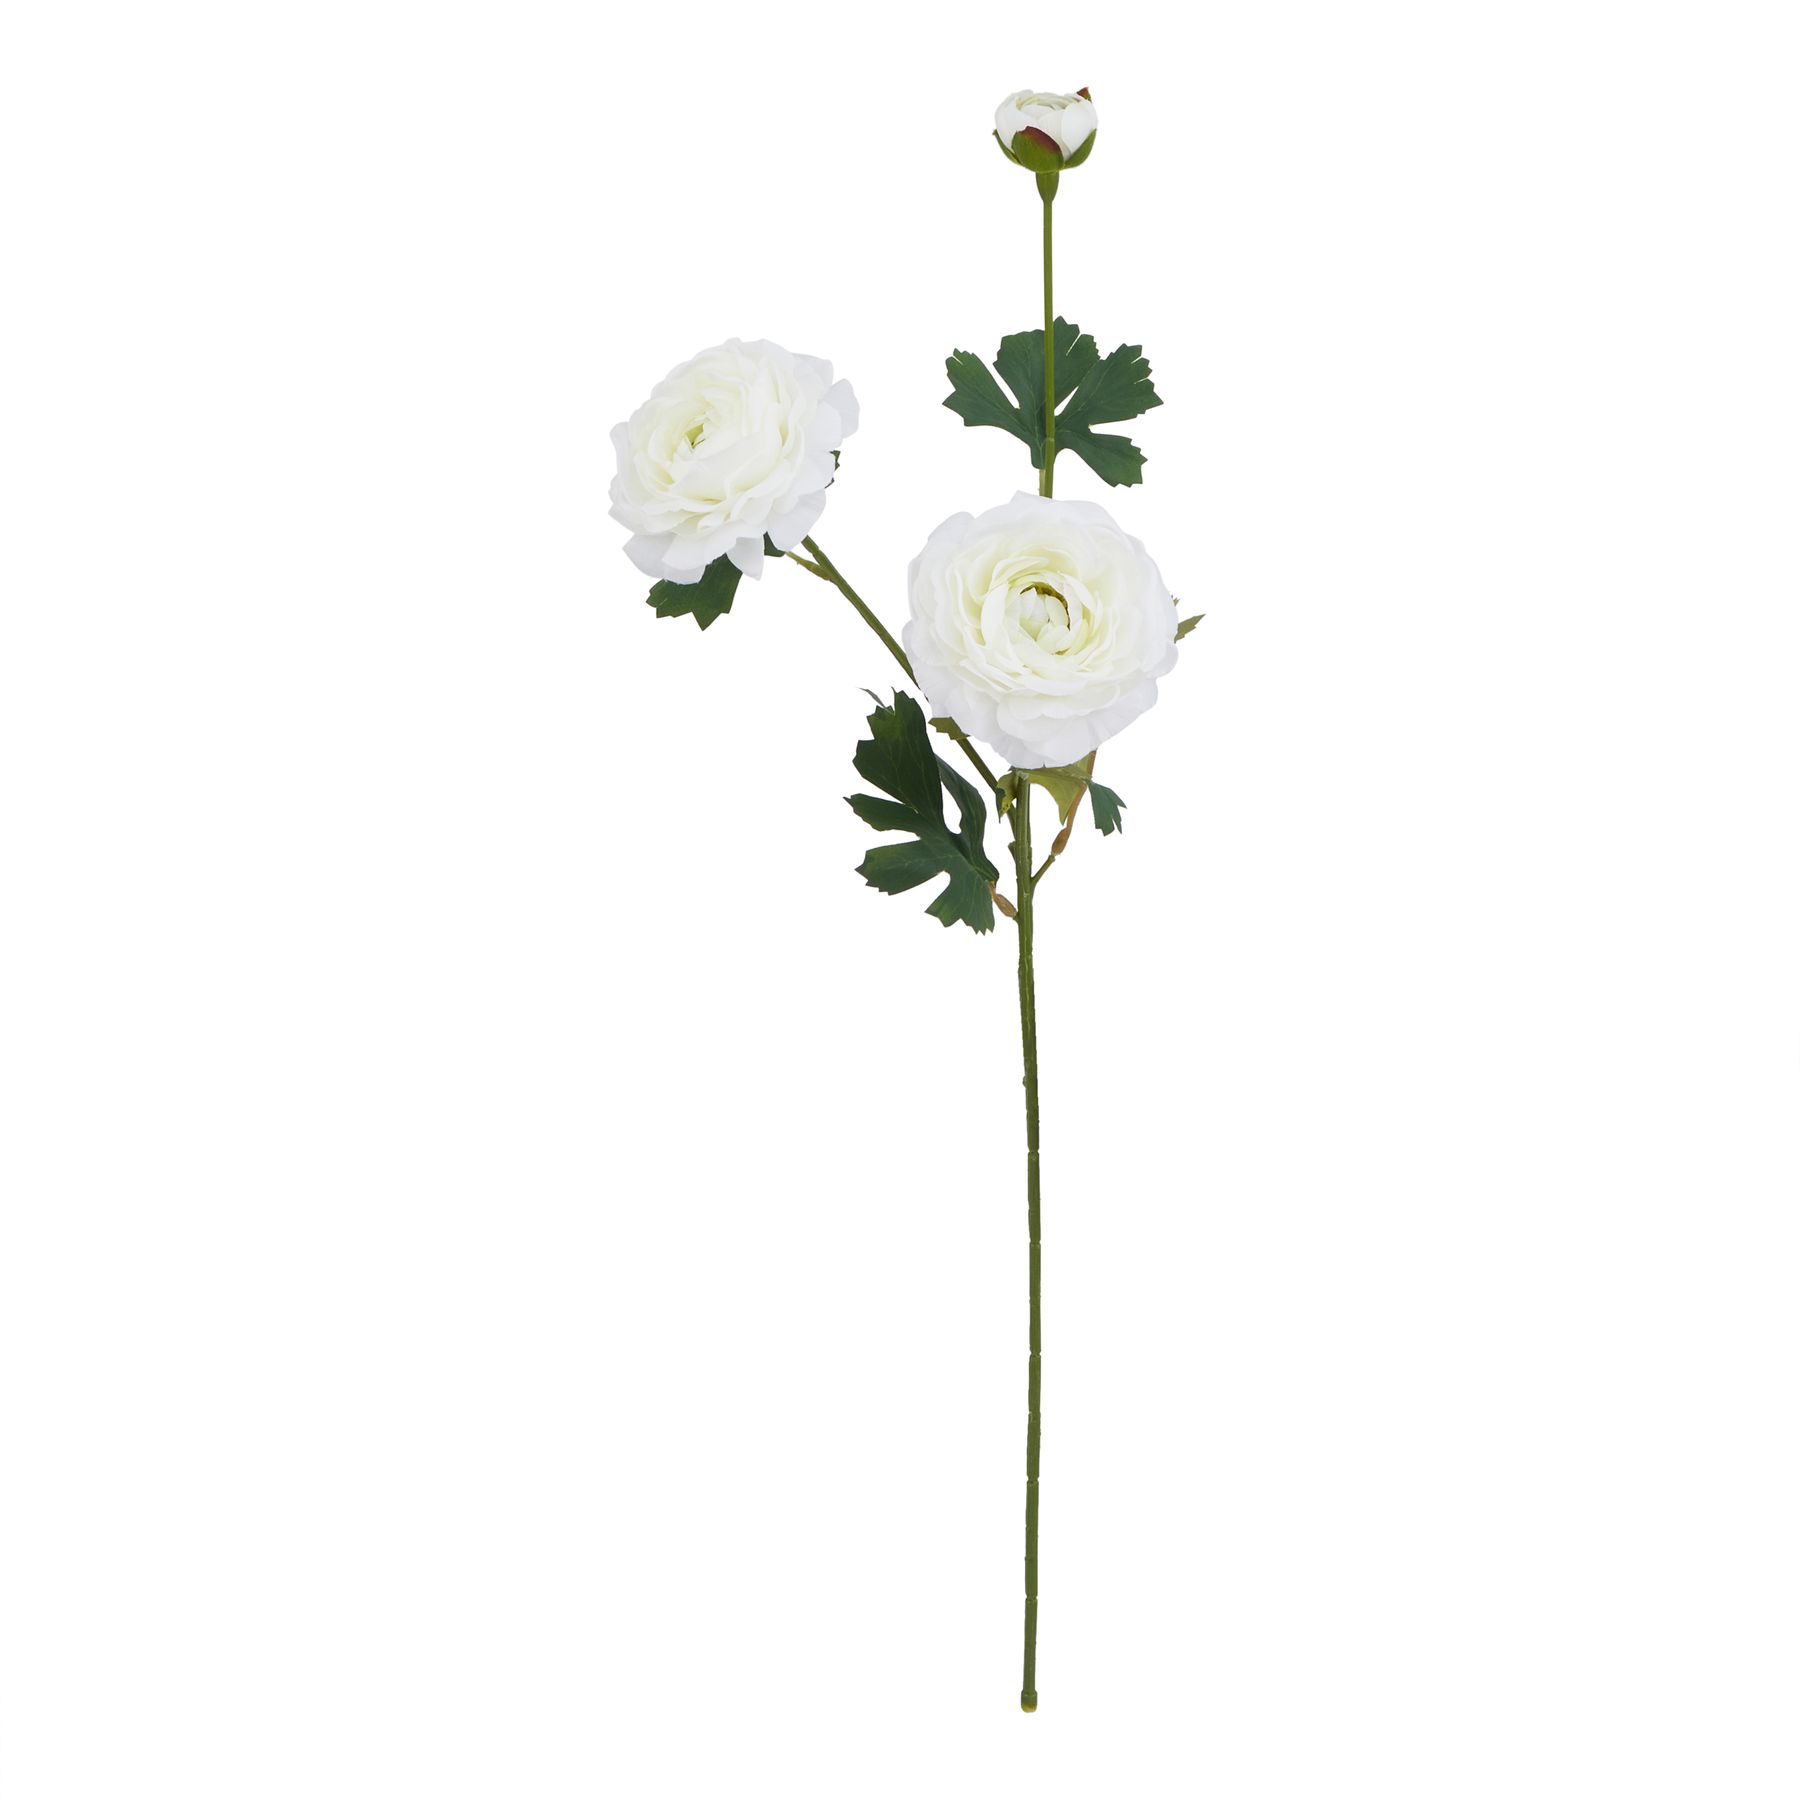 The Natural Garden Collection White Ranunculus - Image 1